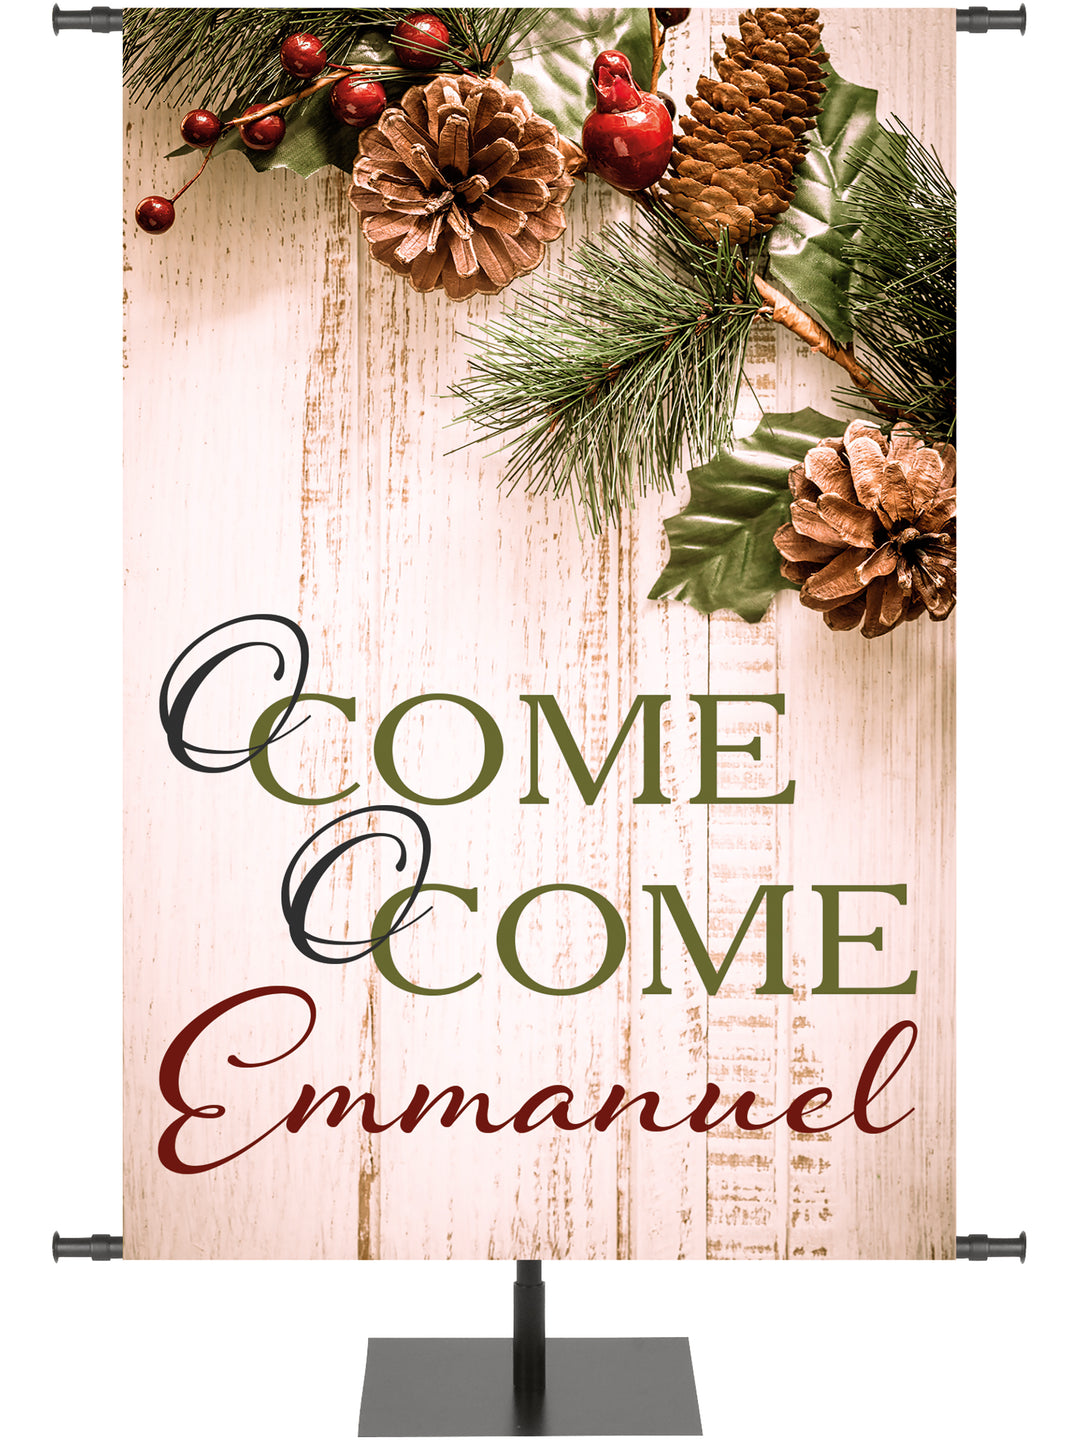 Church Banner for Christmas O Come Emmanuel on rustic wood with pine cones and holly